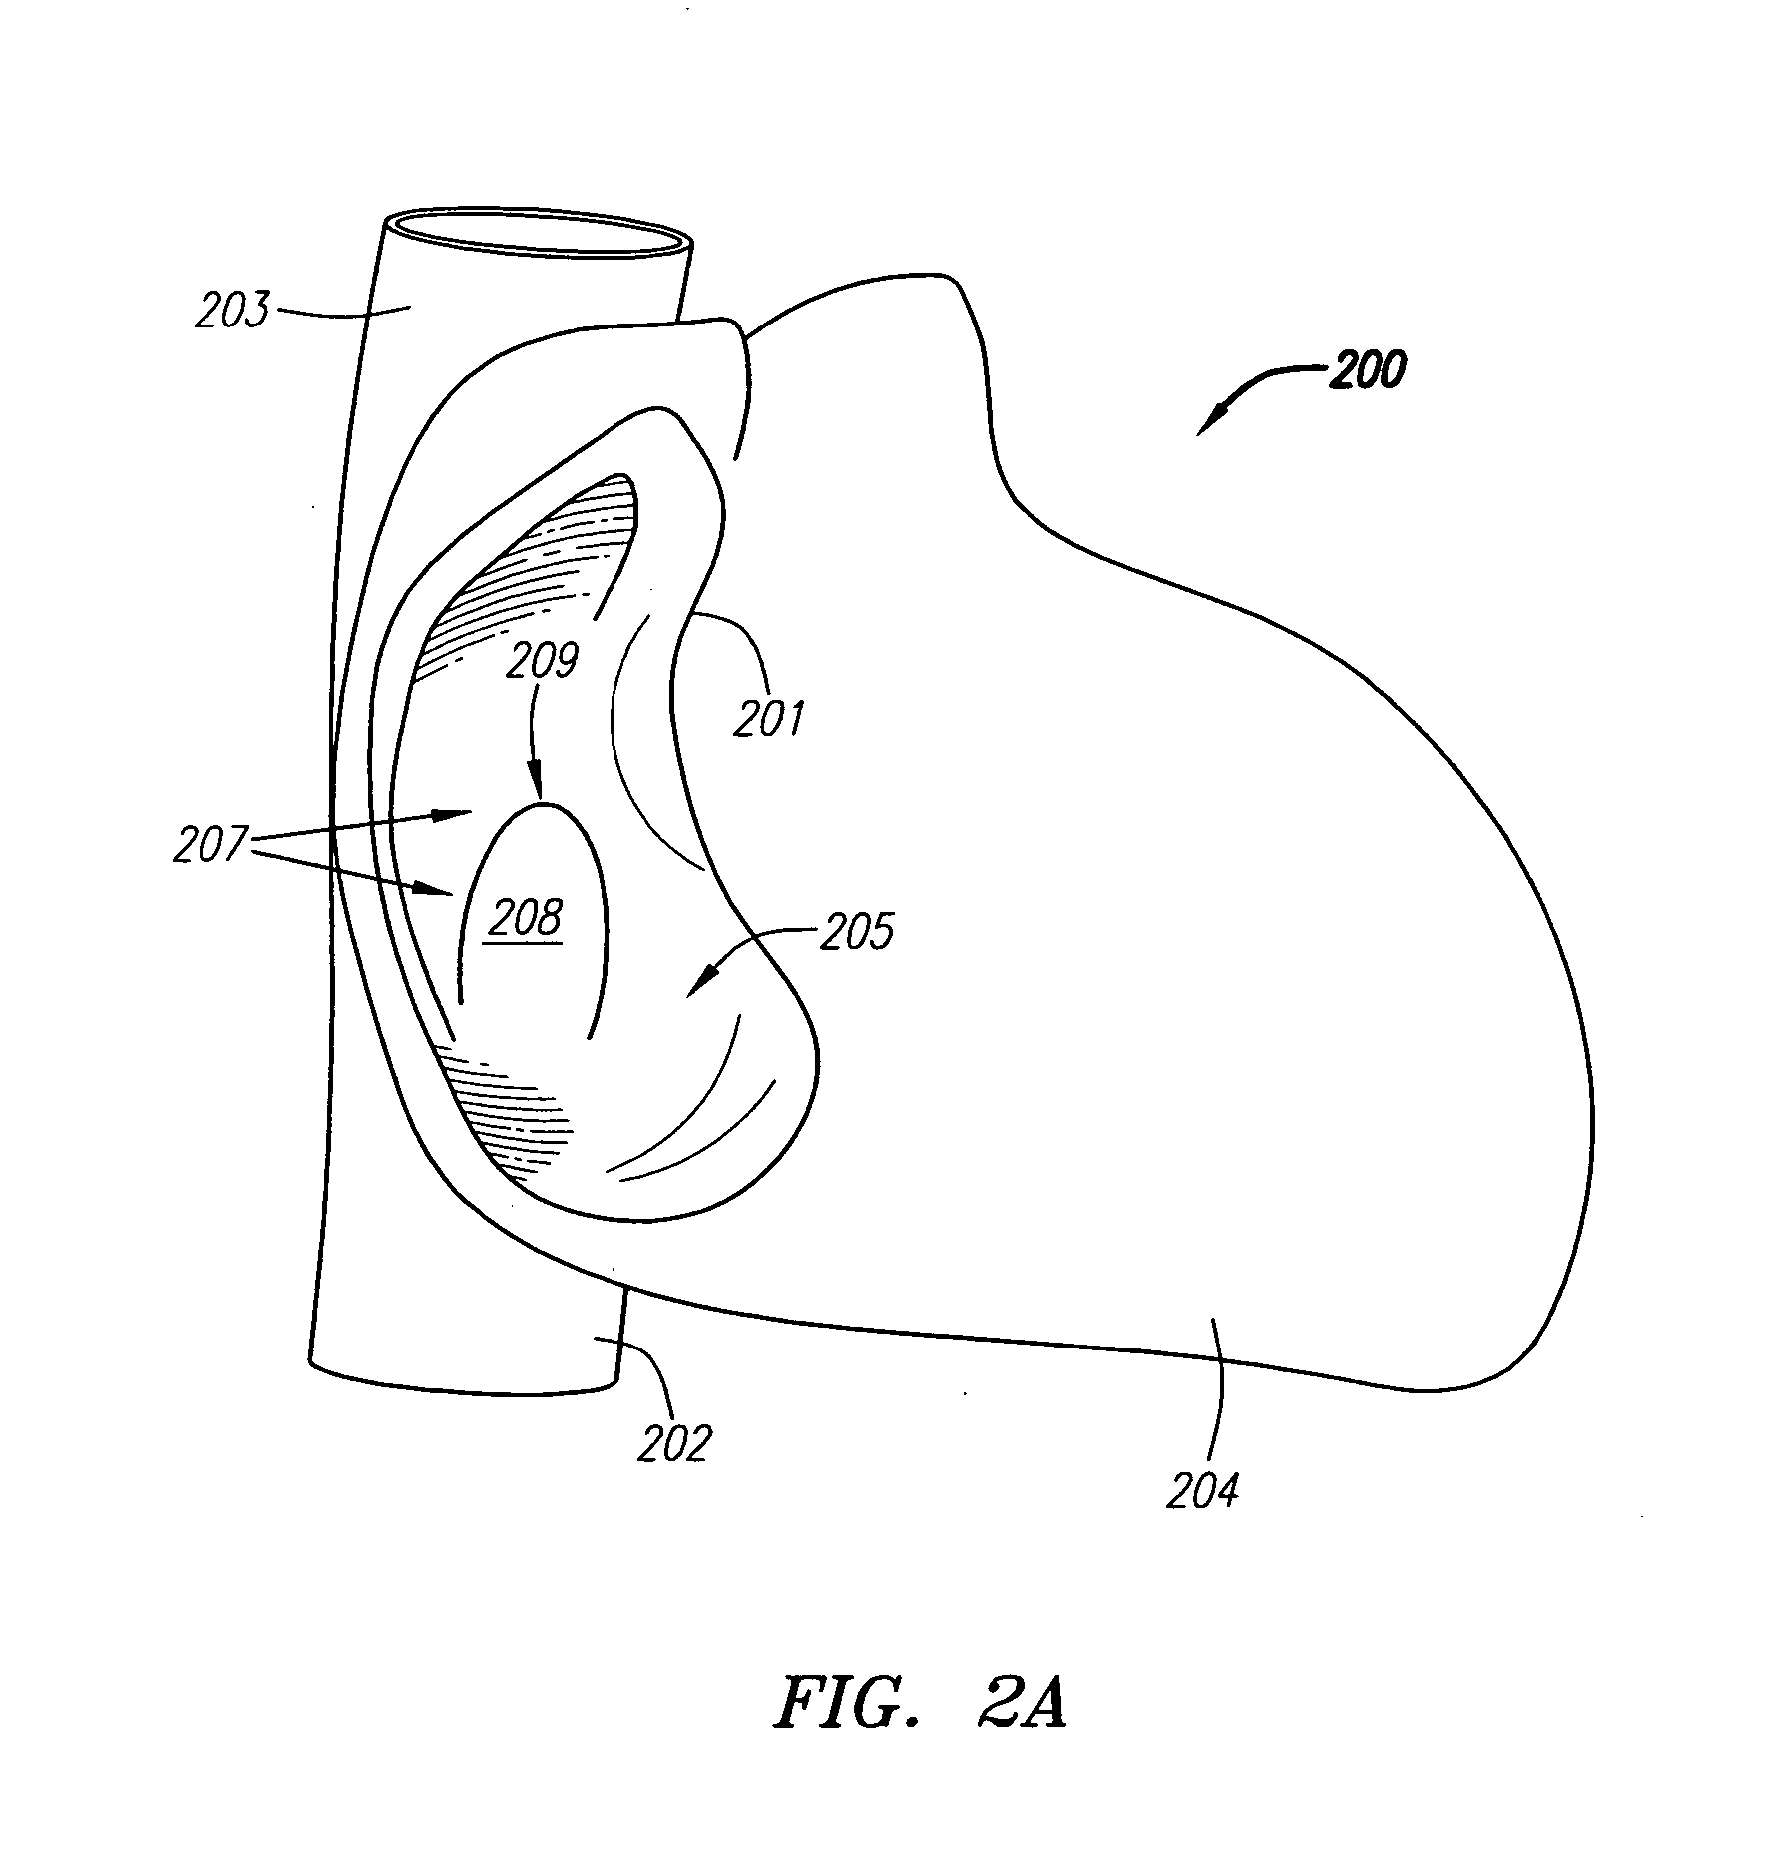 Suture-based systems and methods for treating septal defects